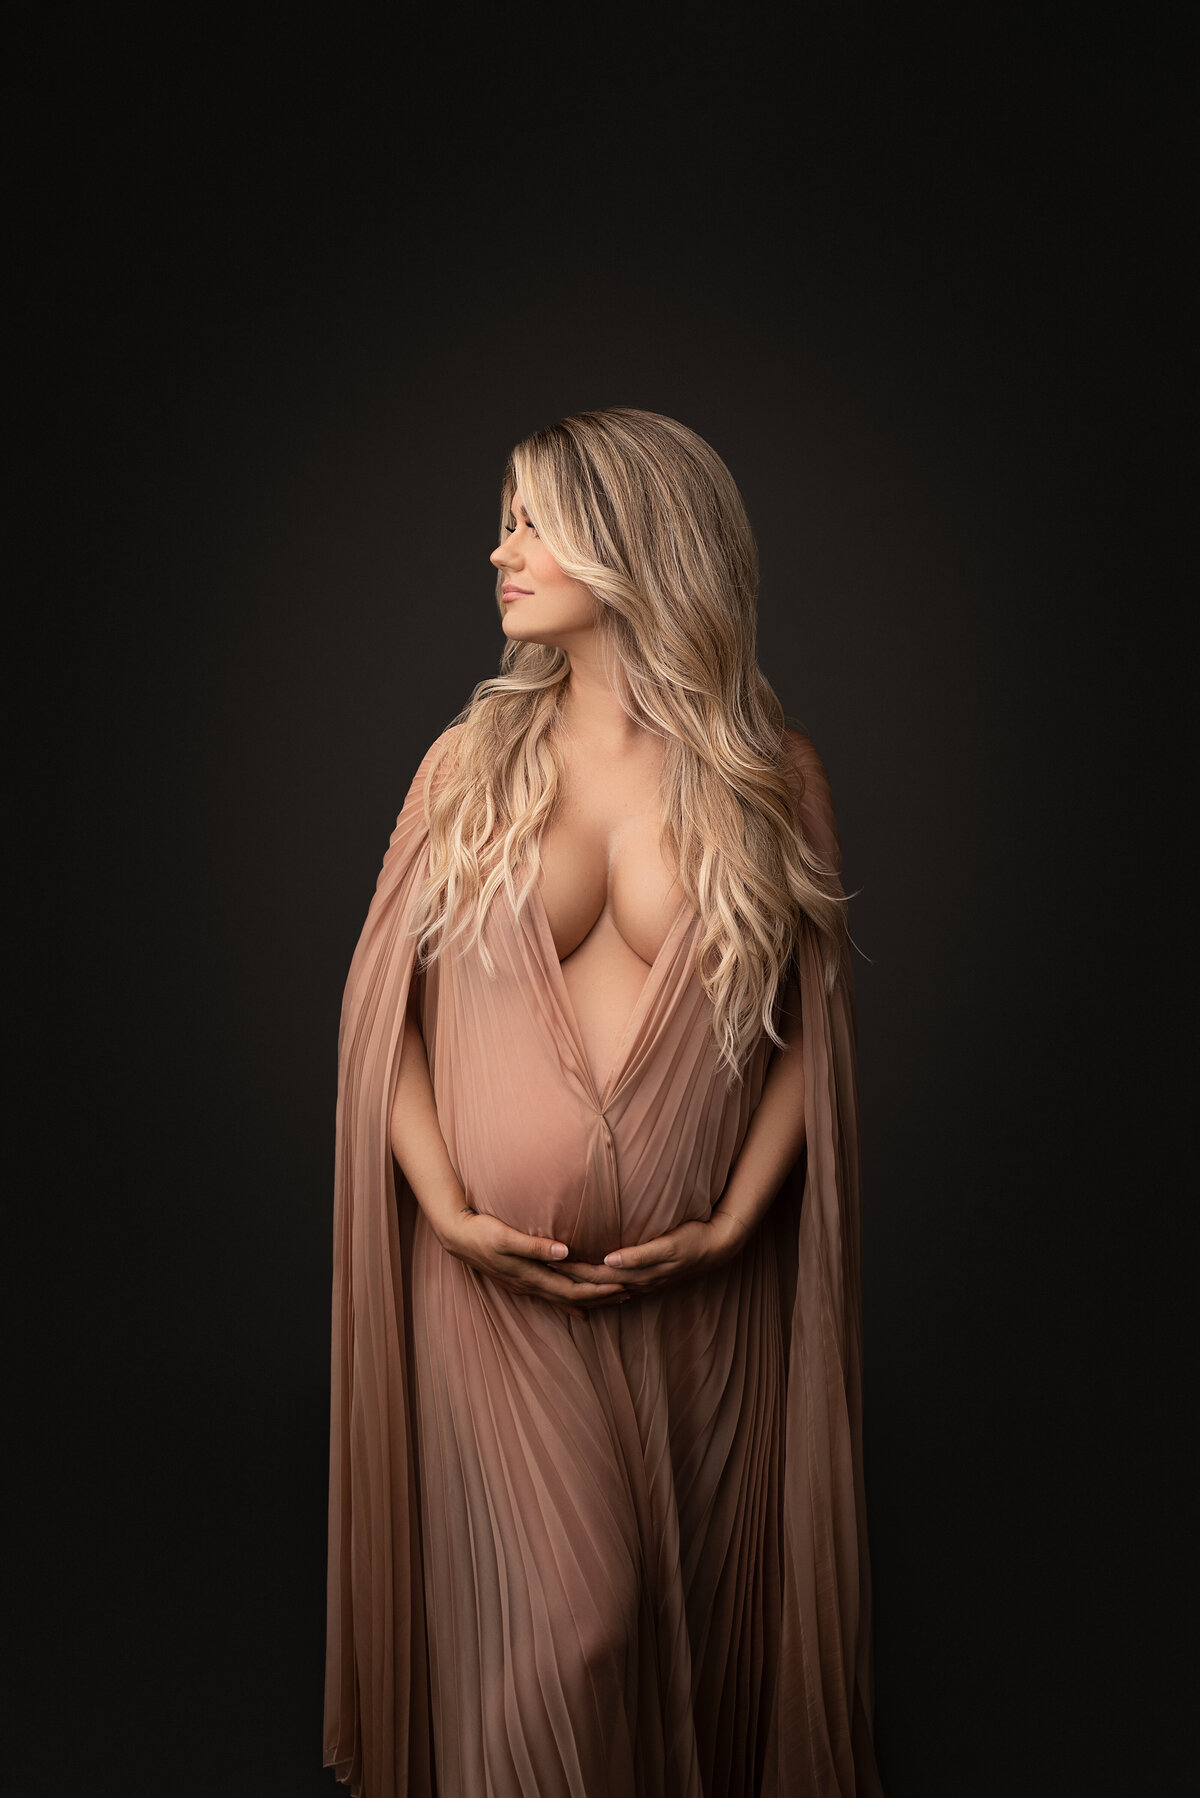 Philadelphia Main Line's best maternity photographer Katie Marshall captures expectant mom for a fine art maternity photoshoot. Expectant mom in a floor length dusty rose maternity photoshoot dress with caped sleeves has her body facing the camera. Her hands are gently resting underneath her baby bump. She is looking over her shoulder looking toward the light.